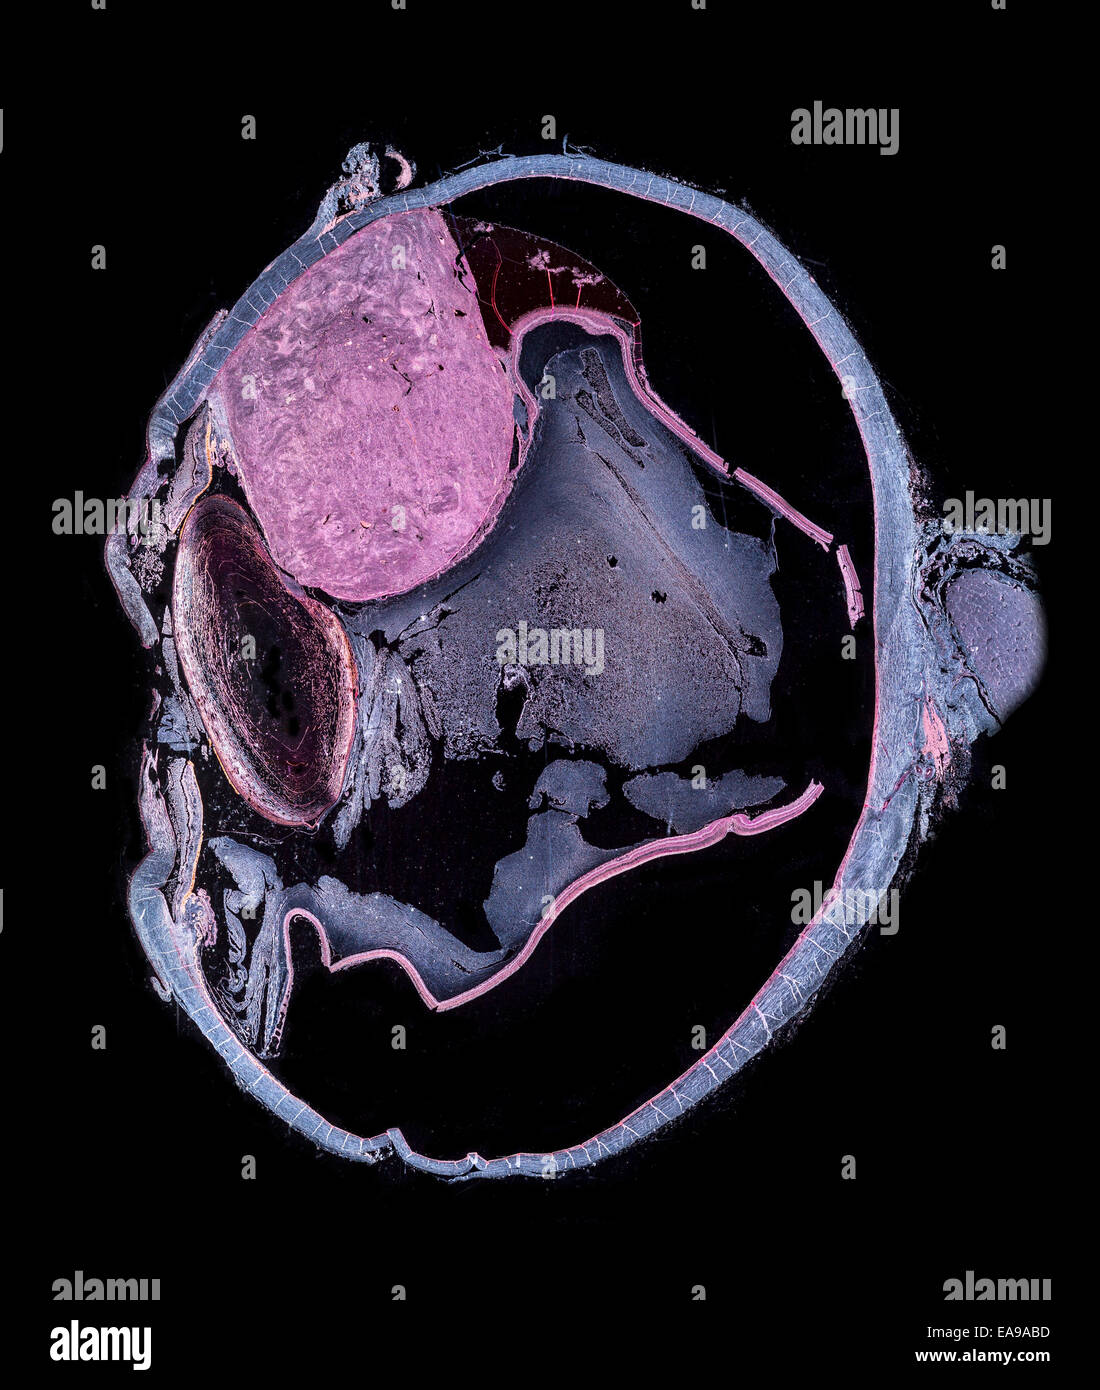 Human eye section showing structure with diseased melanotic tumor (large pink area) darkfield photomicrograph Stock Photo